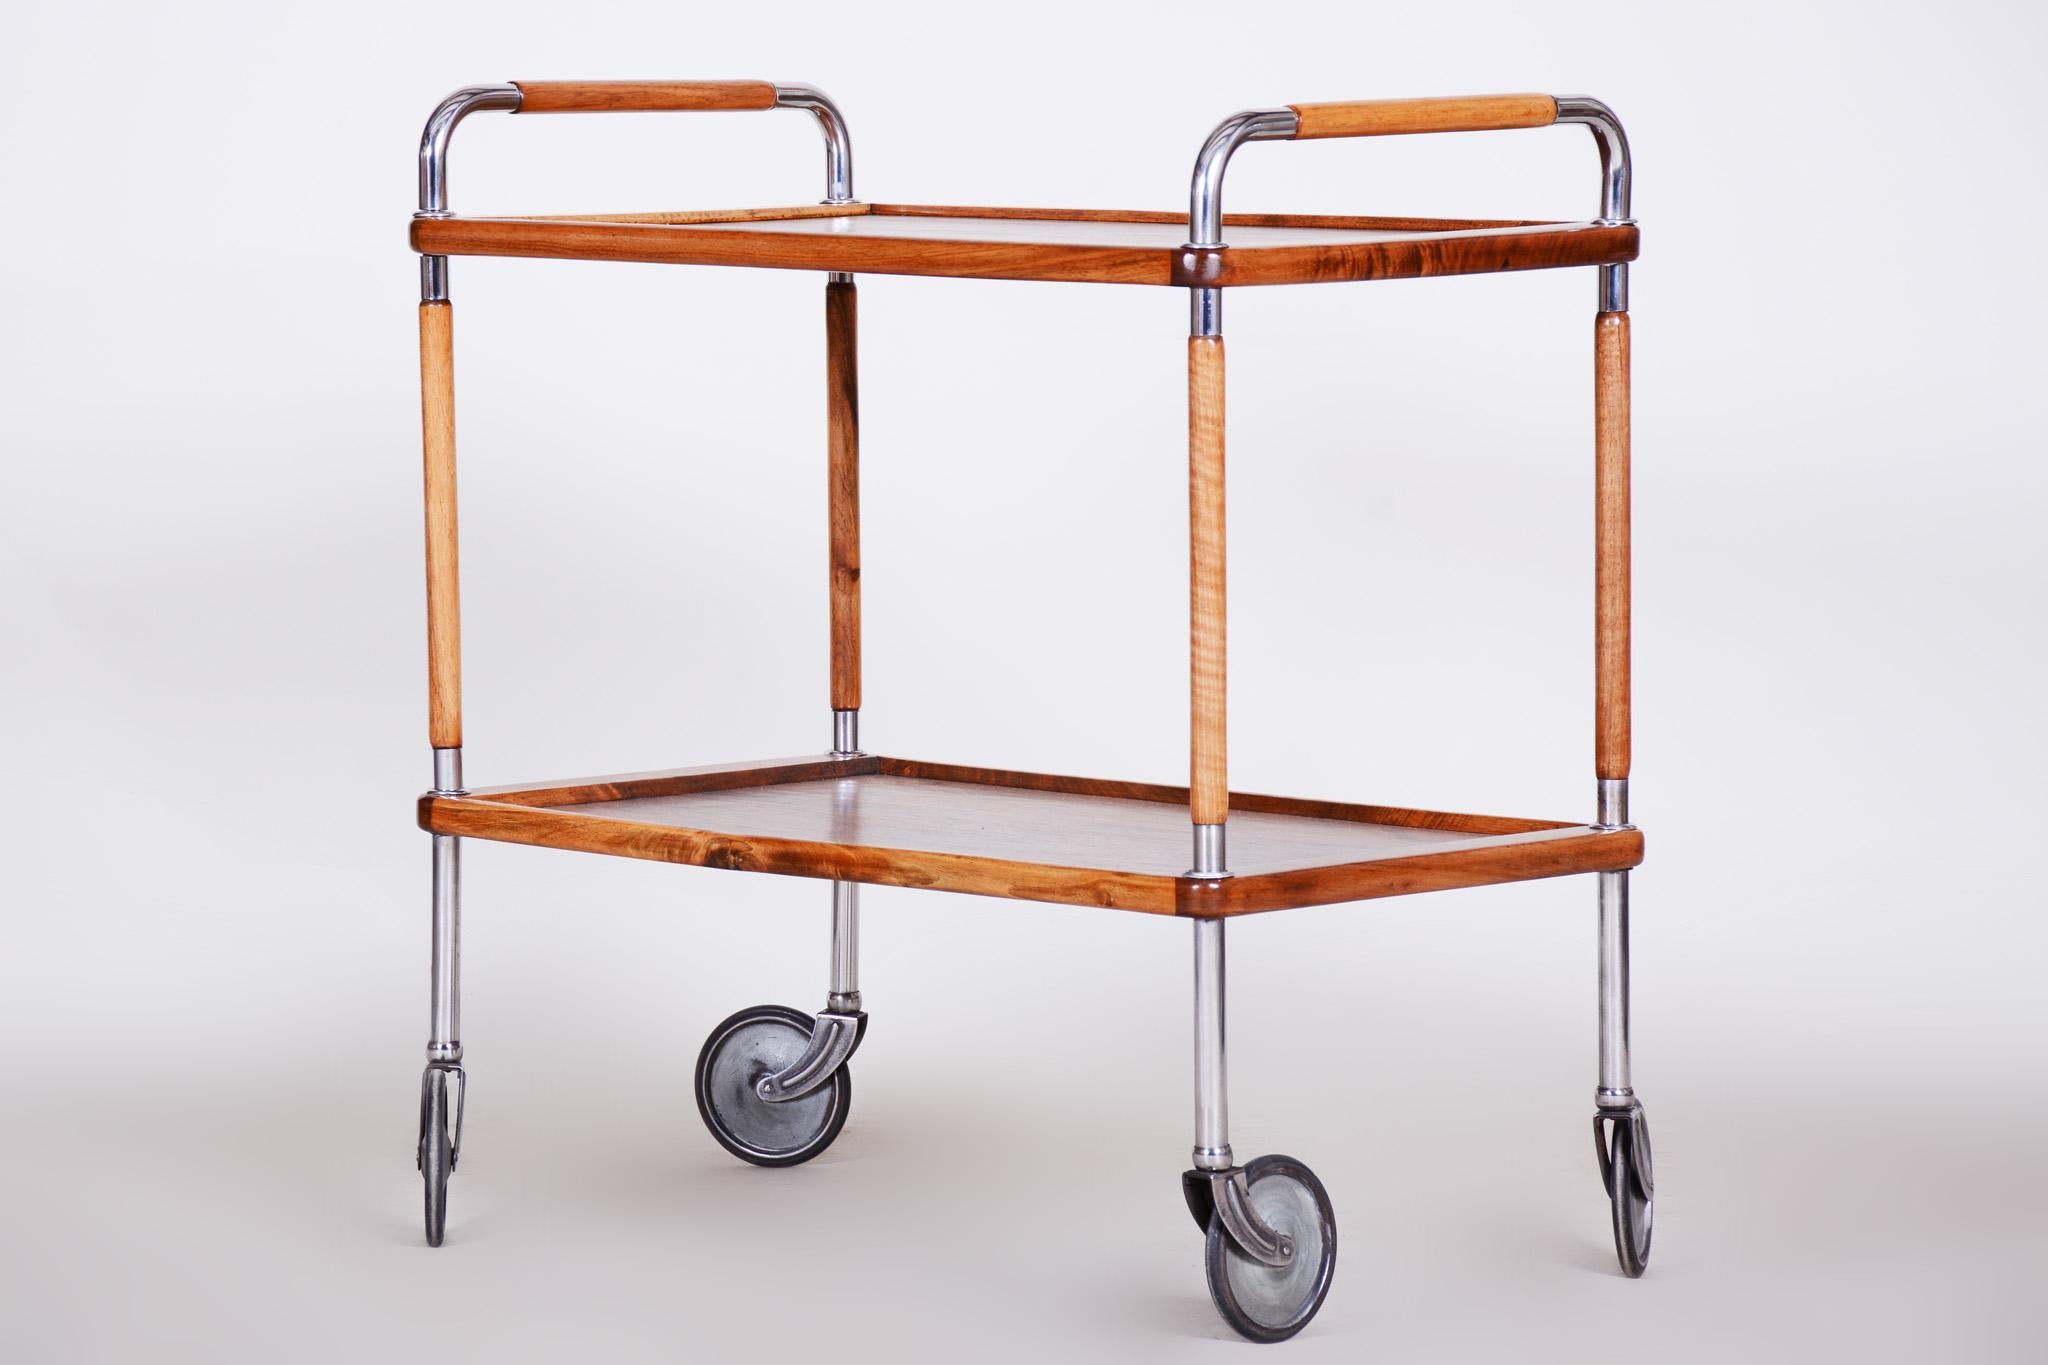 Chrome Restored Art Deco Serving Trolley Made in the 1930s by Thonet, Walnut and Steel For Sale